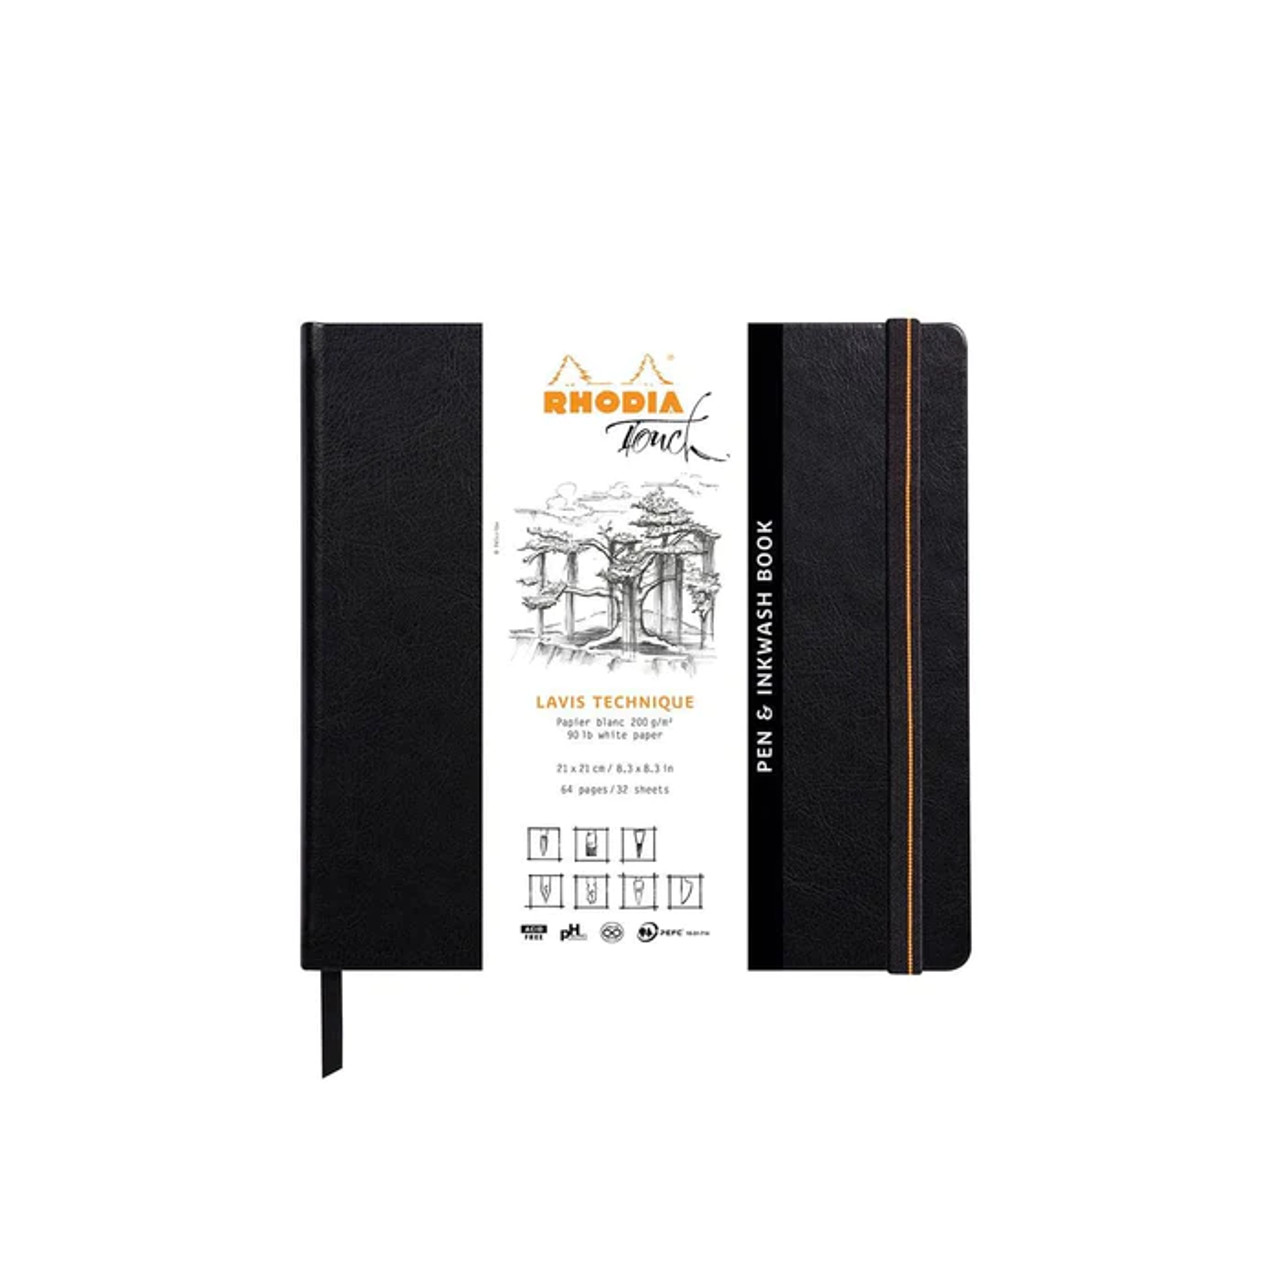 Rhodia Touch Pen & Inkwash Book Hardcover 21x21cm 200gsm